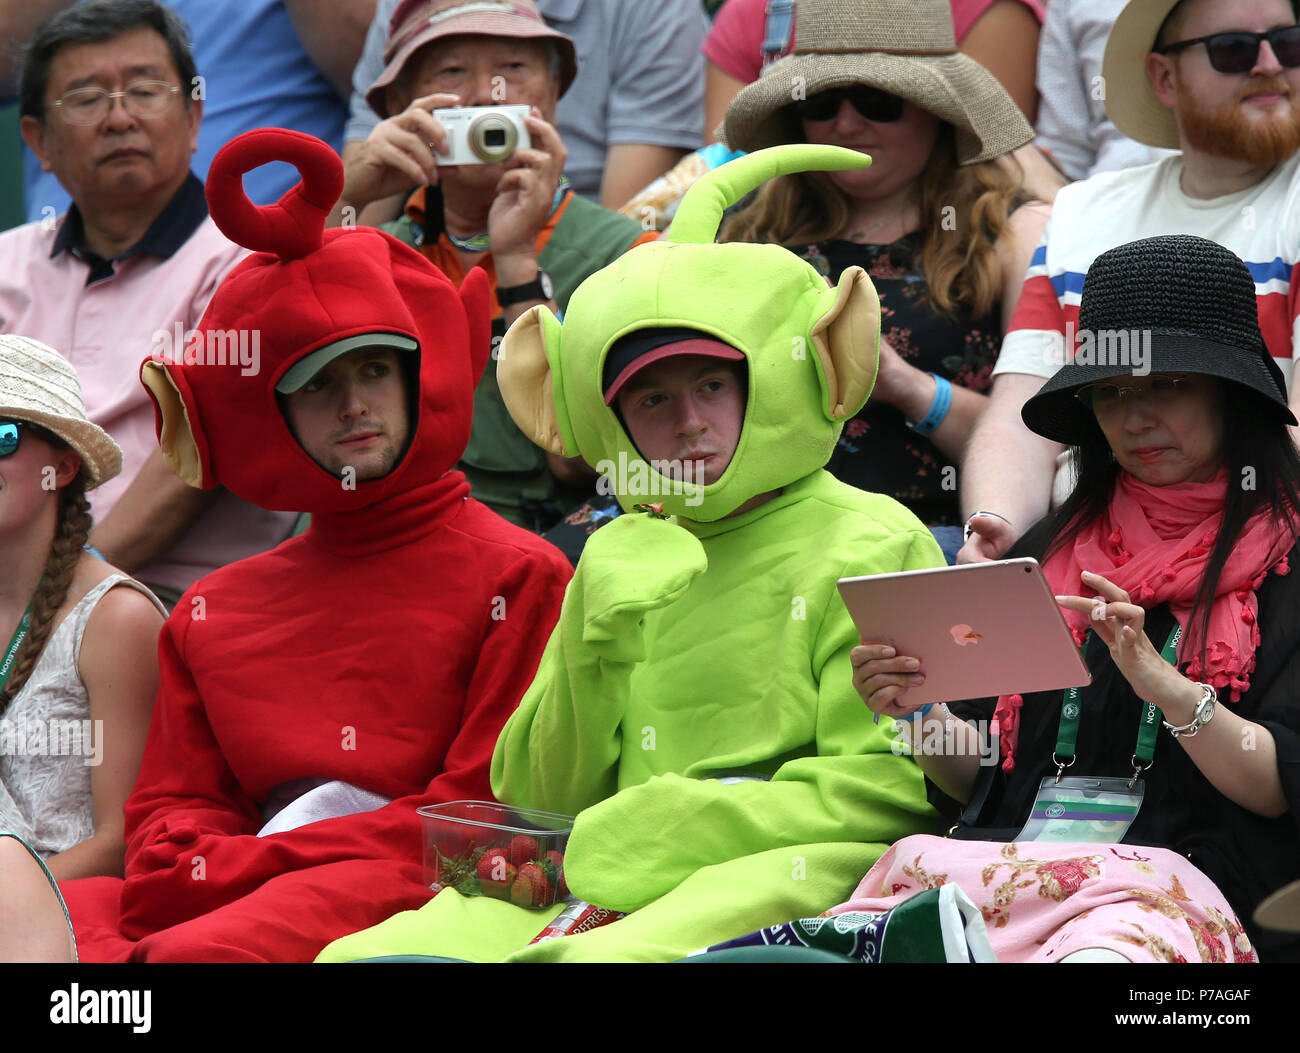 FANS DRESSED UP AS TELETUBBIES, THE WIMBLEDON CHAMPIONSHIPS 2018, THE WIMBLEDON CHAMPIONSHIPS 2018 THE ALL ENGLAND TENNIS CLUB, 2018 Stock Photo